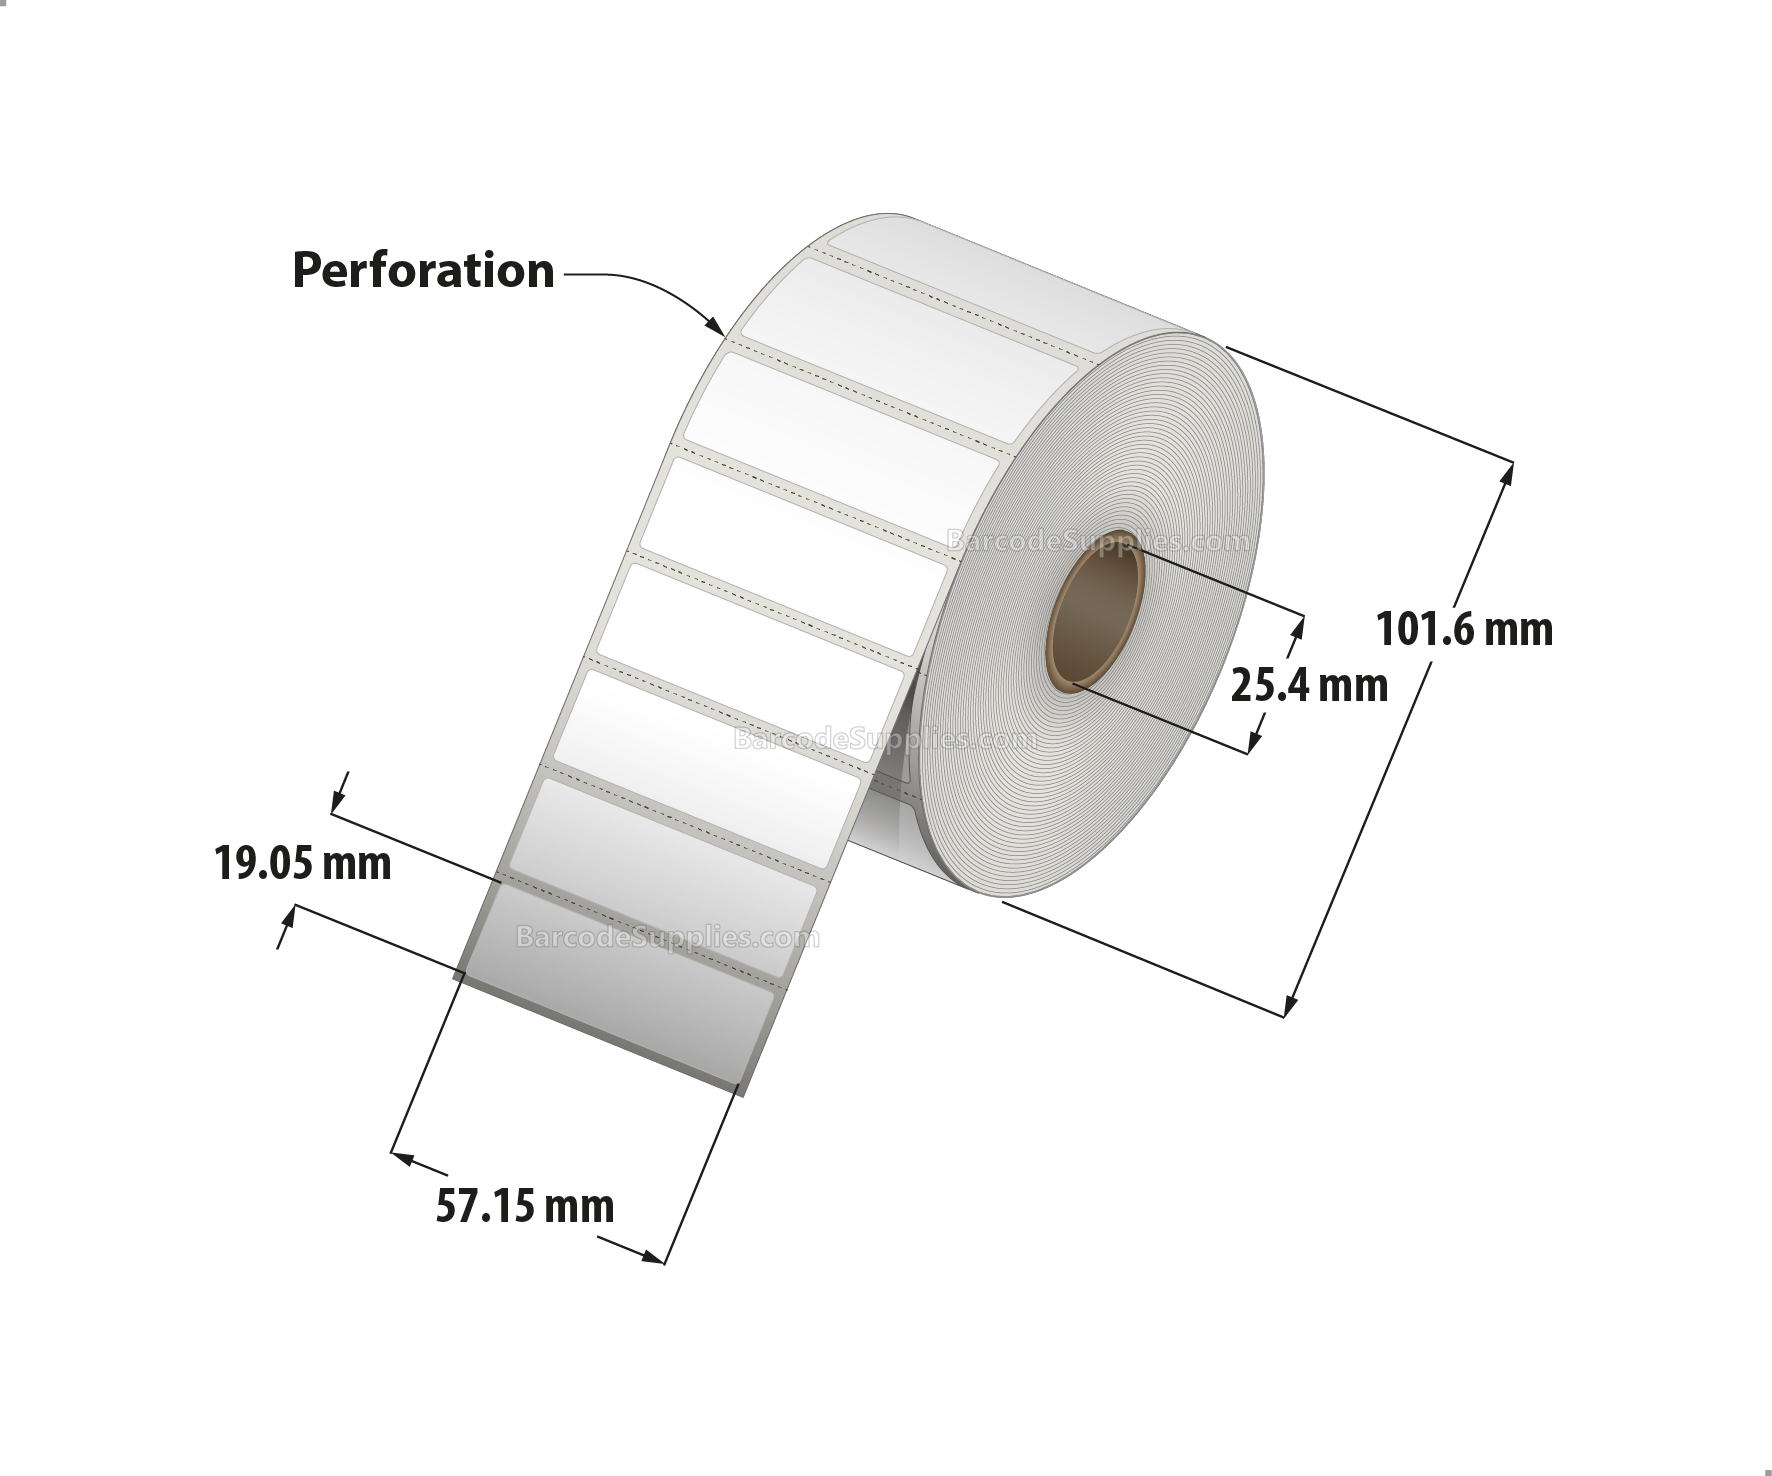 2.25 x 0.75 Direct Thermal White Labels With Rubber Adhesive - Perforated - 1780 Labels Per Roll - Carton Of 12 Rolls - 21360 Labels Total - MPN: RDT4-225075-1P